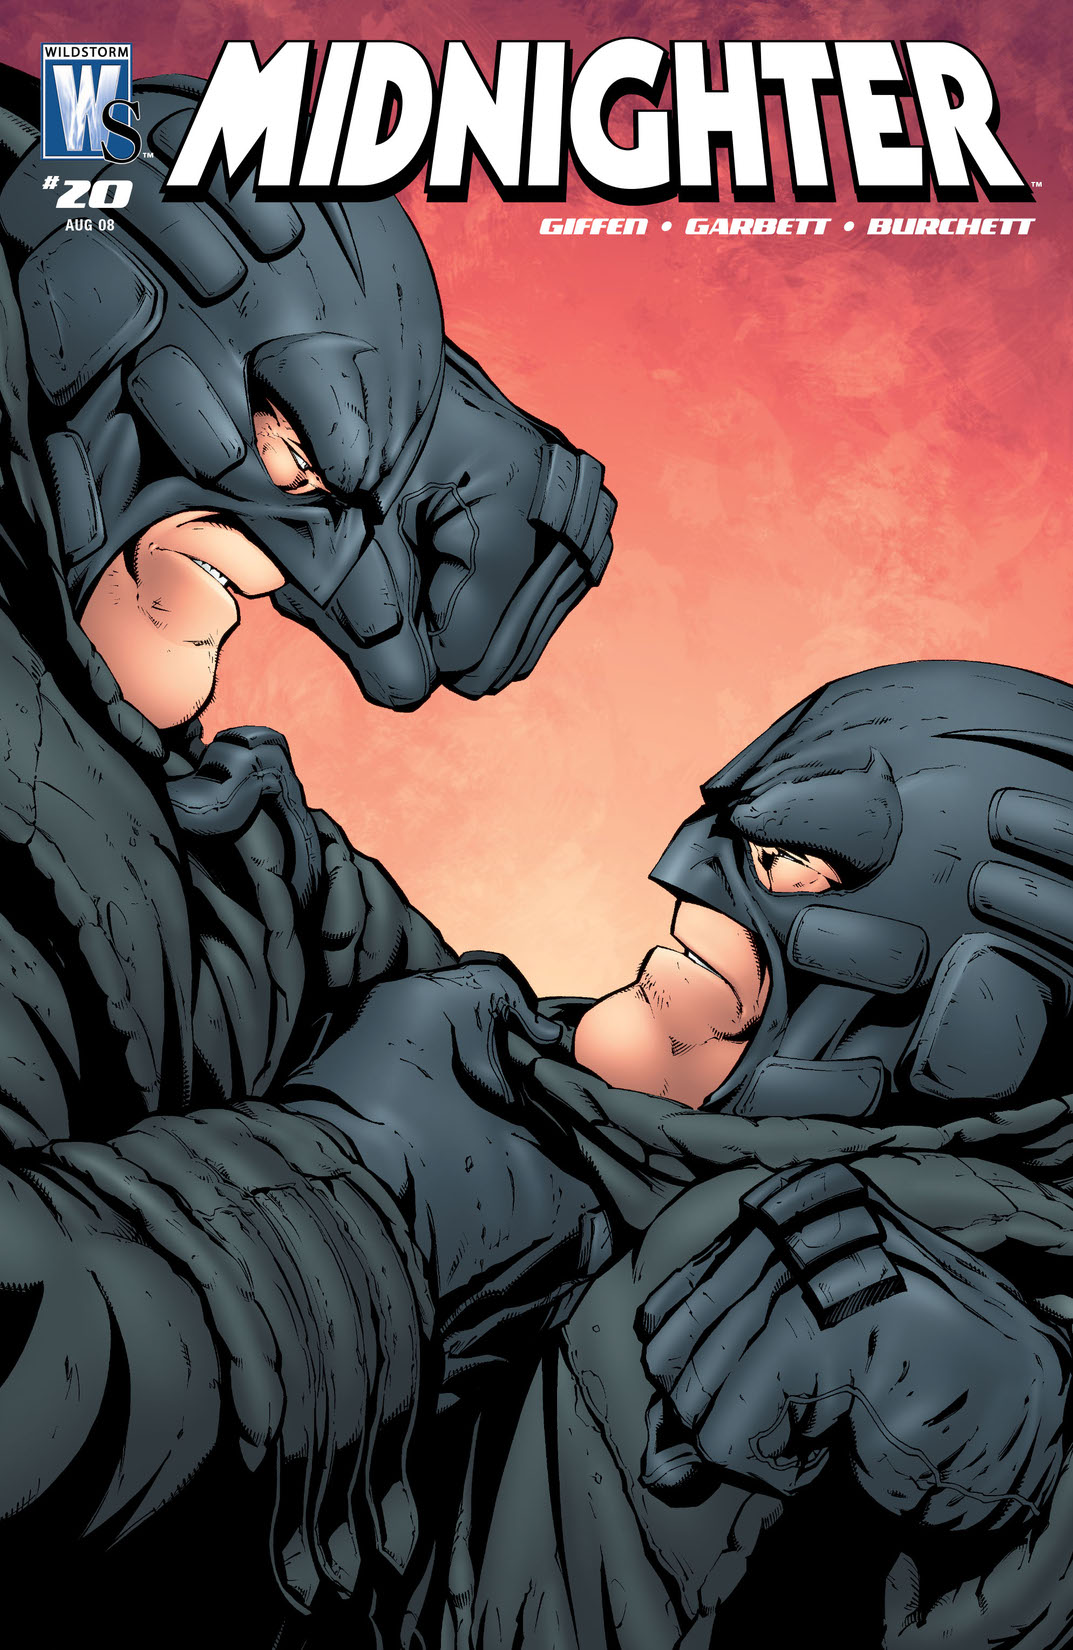 Midnighter (2006-) #20 preview images